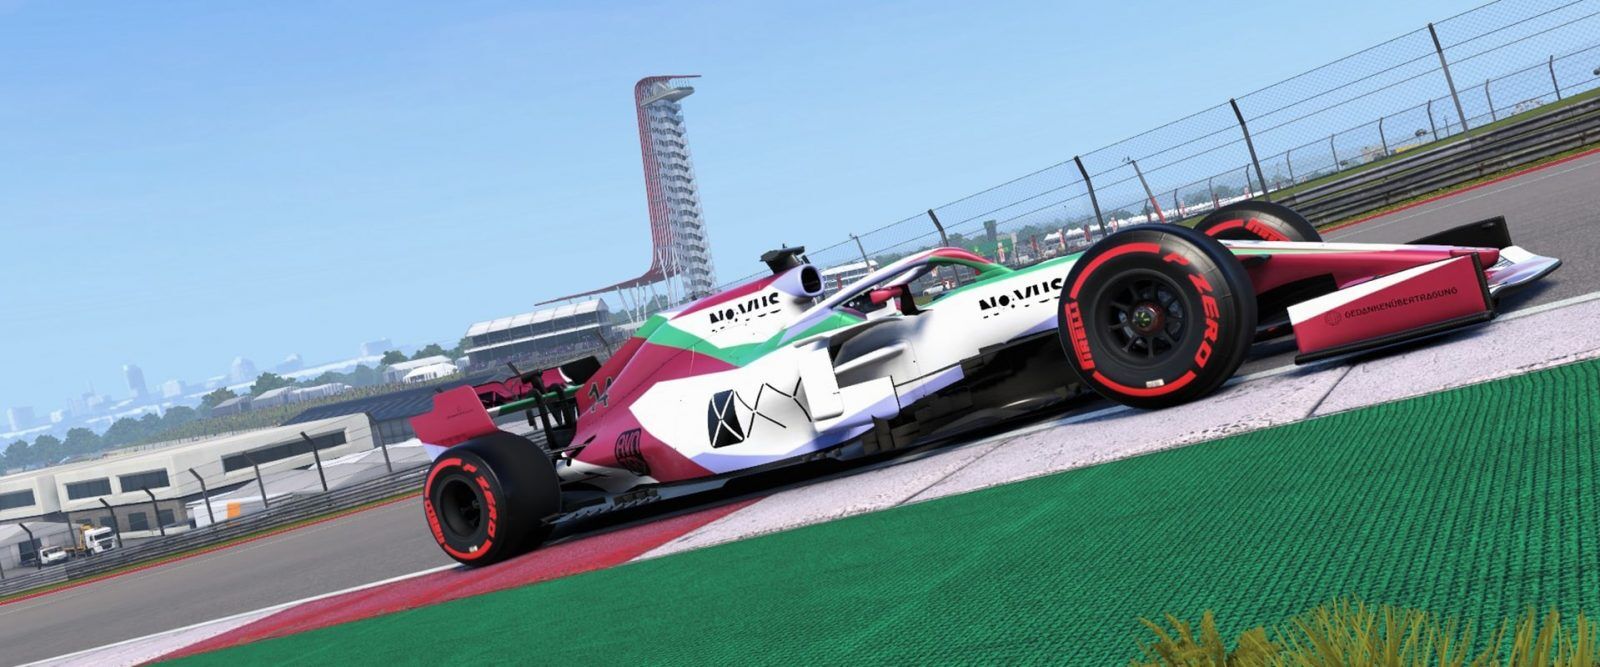 F1 2020: Top 7 Secondary Sponsors for My Team